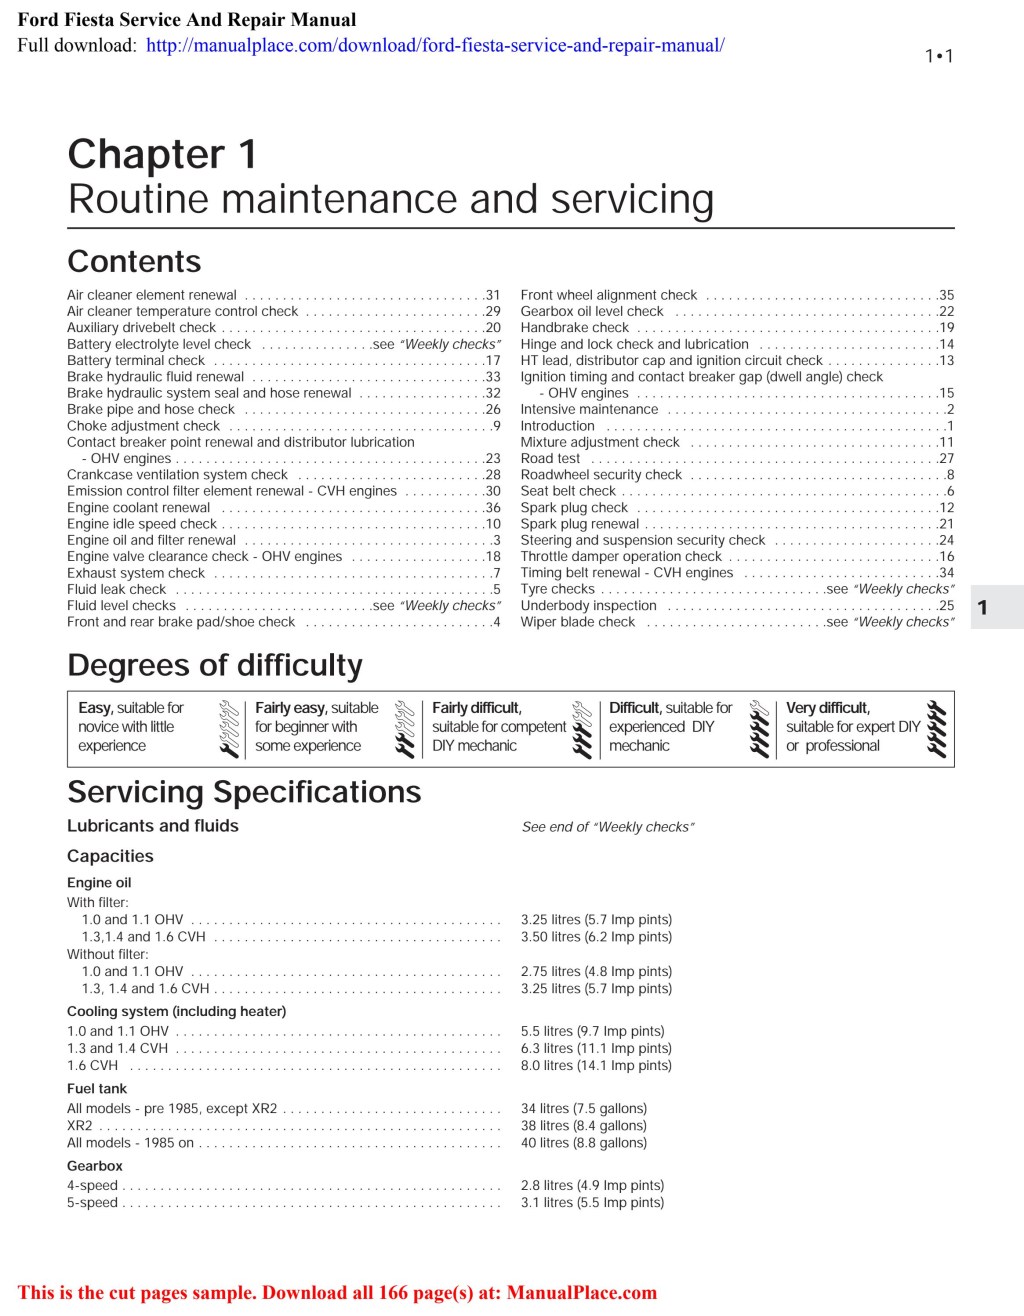 Picture of: Ford Fiesta Service And Repair Manual by JosephineBurnsD – Issuu